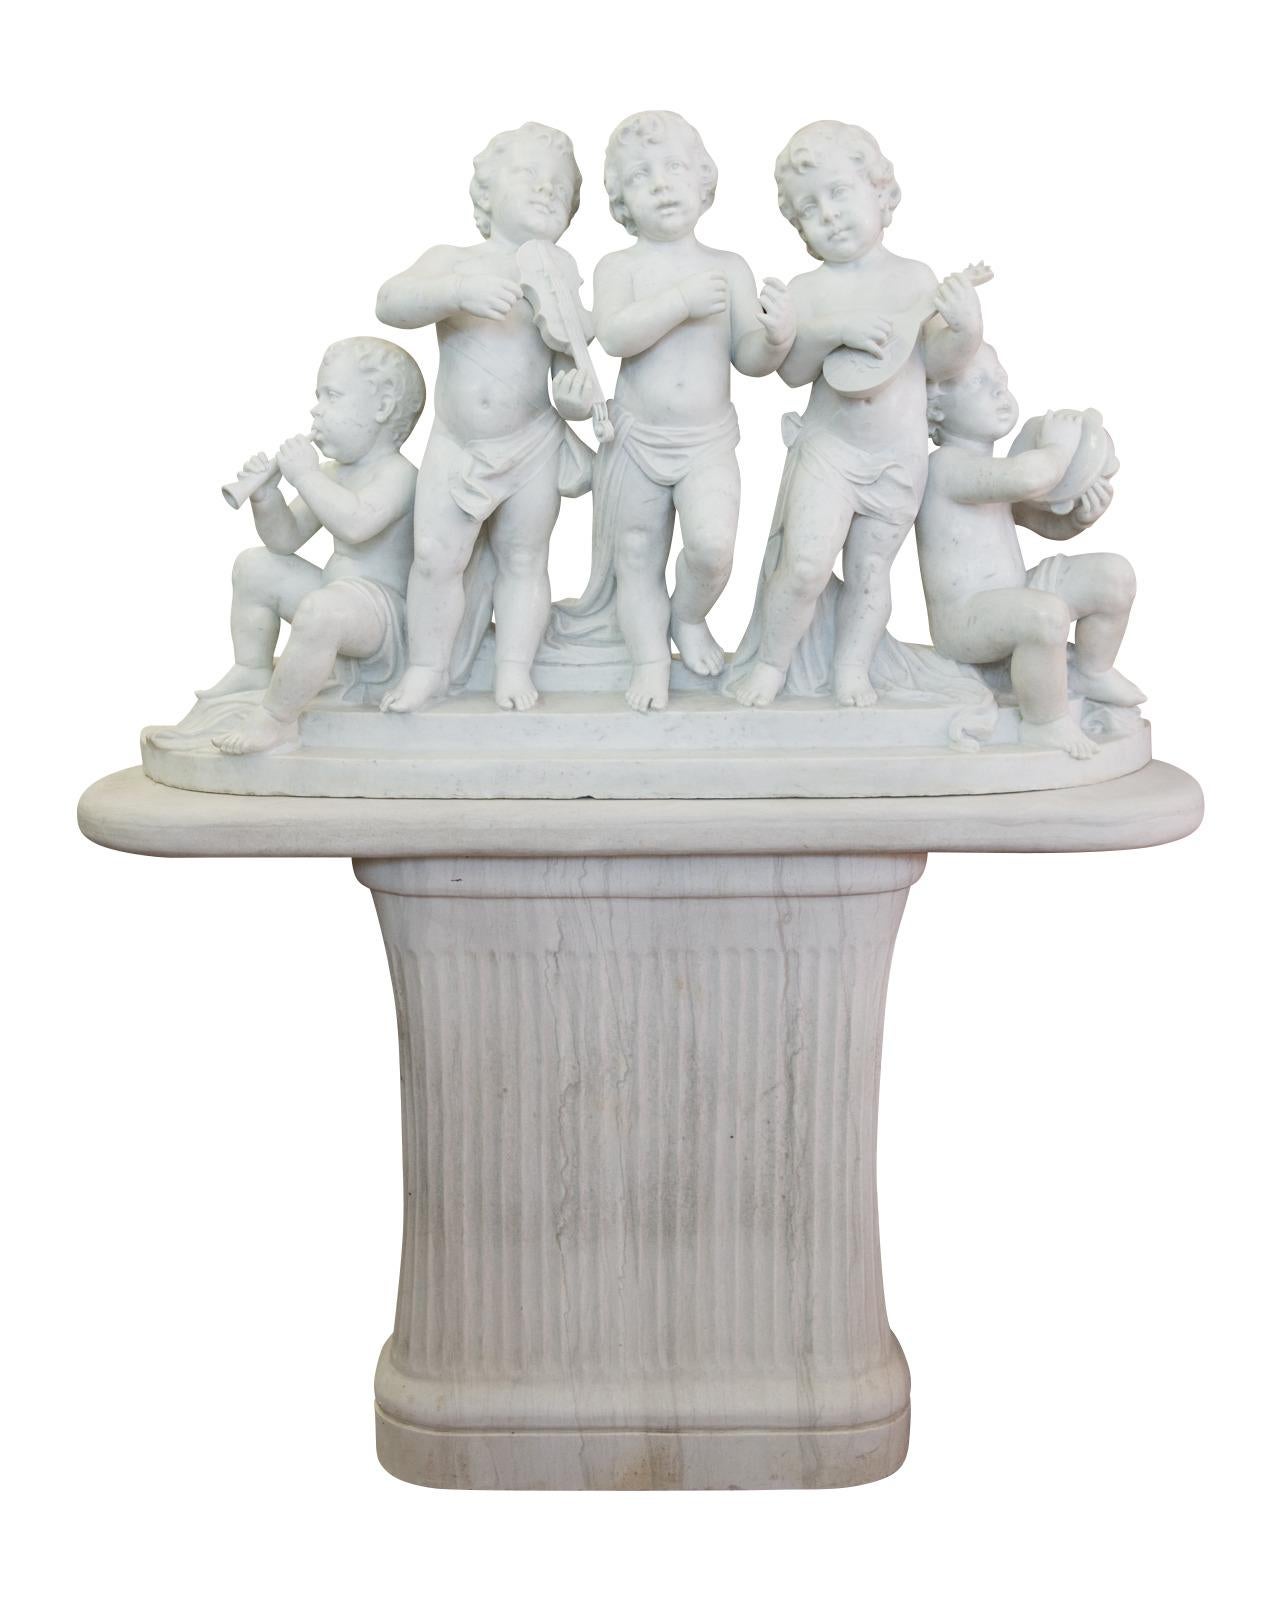 Large 19th Century Italian Carved Marble Group Depicting Musicians  on stand